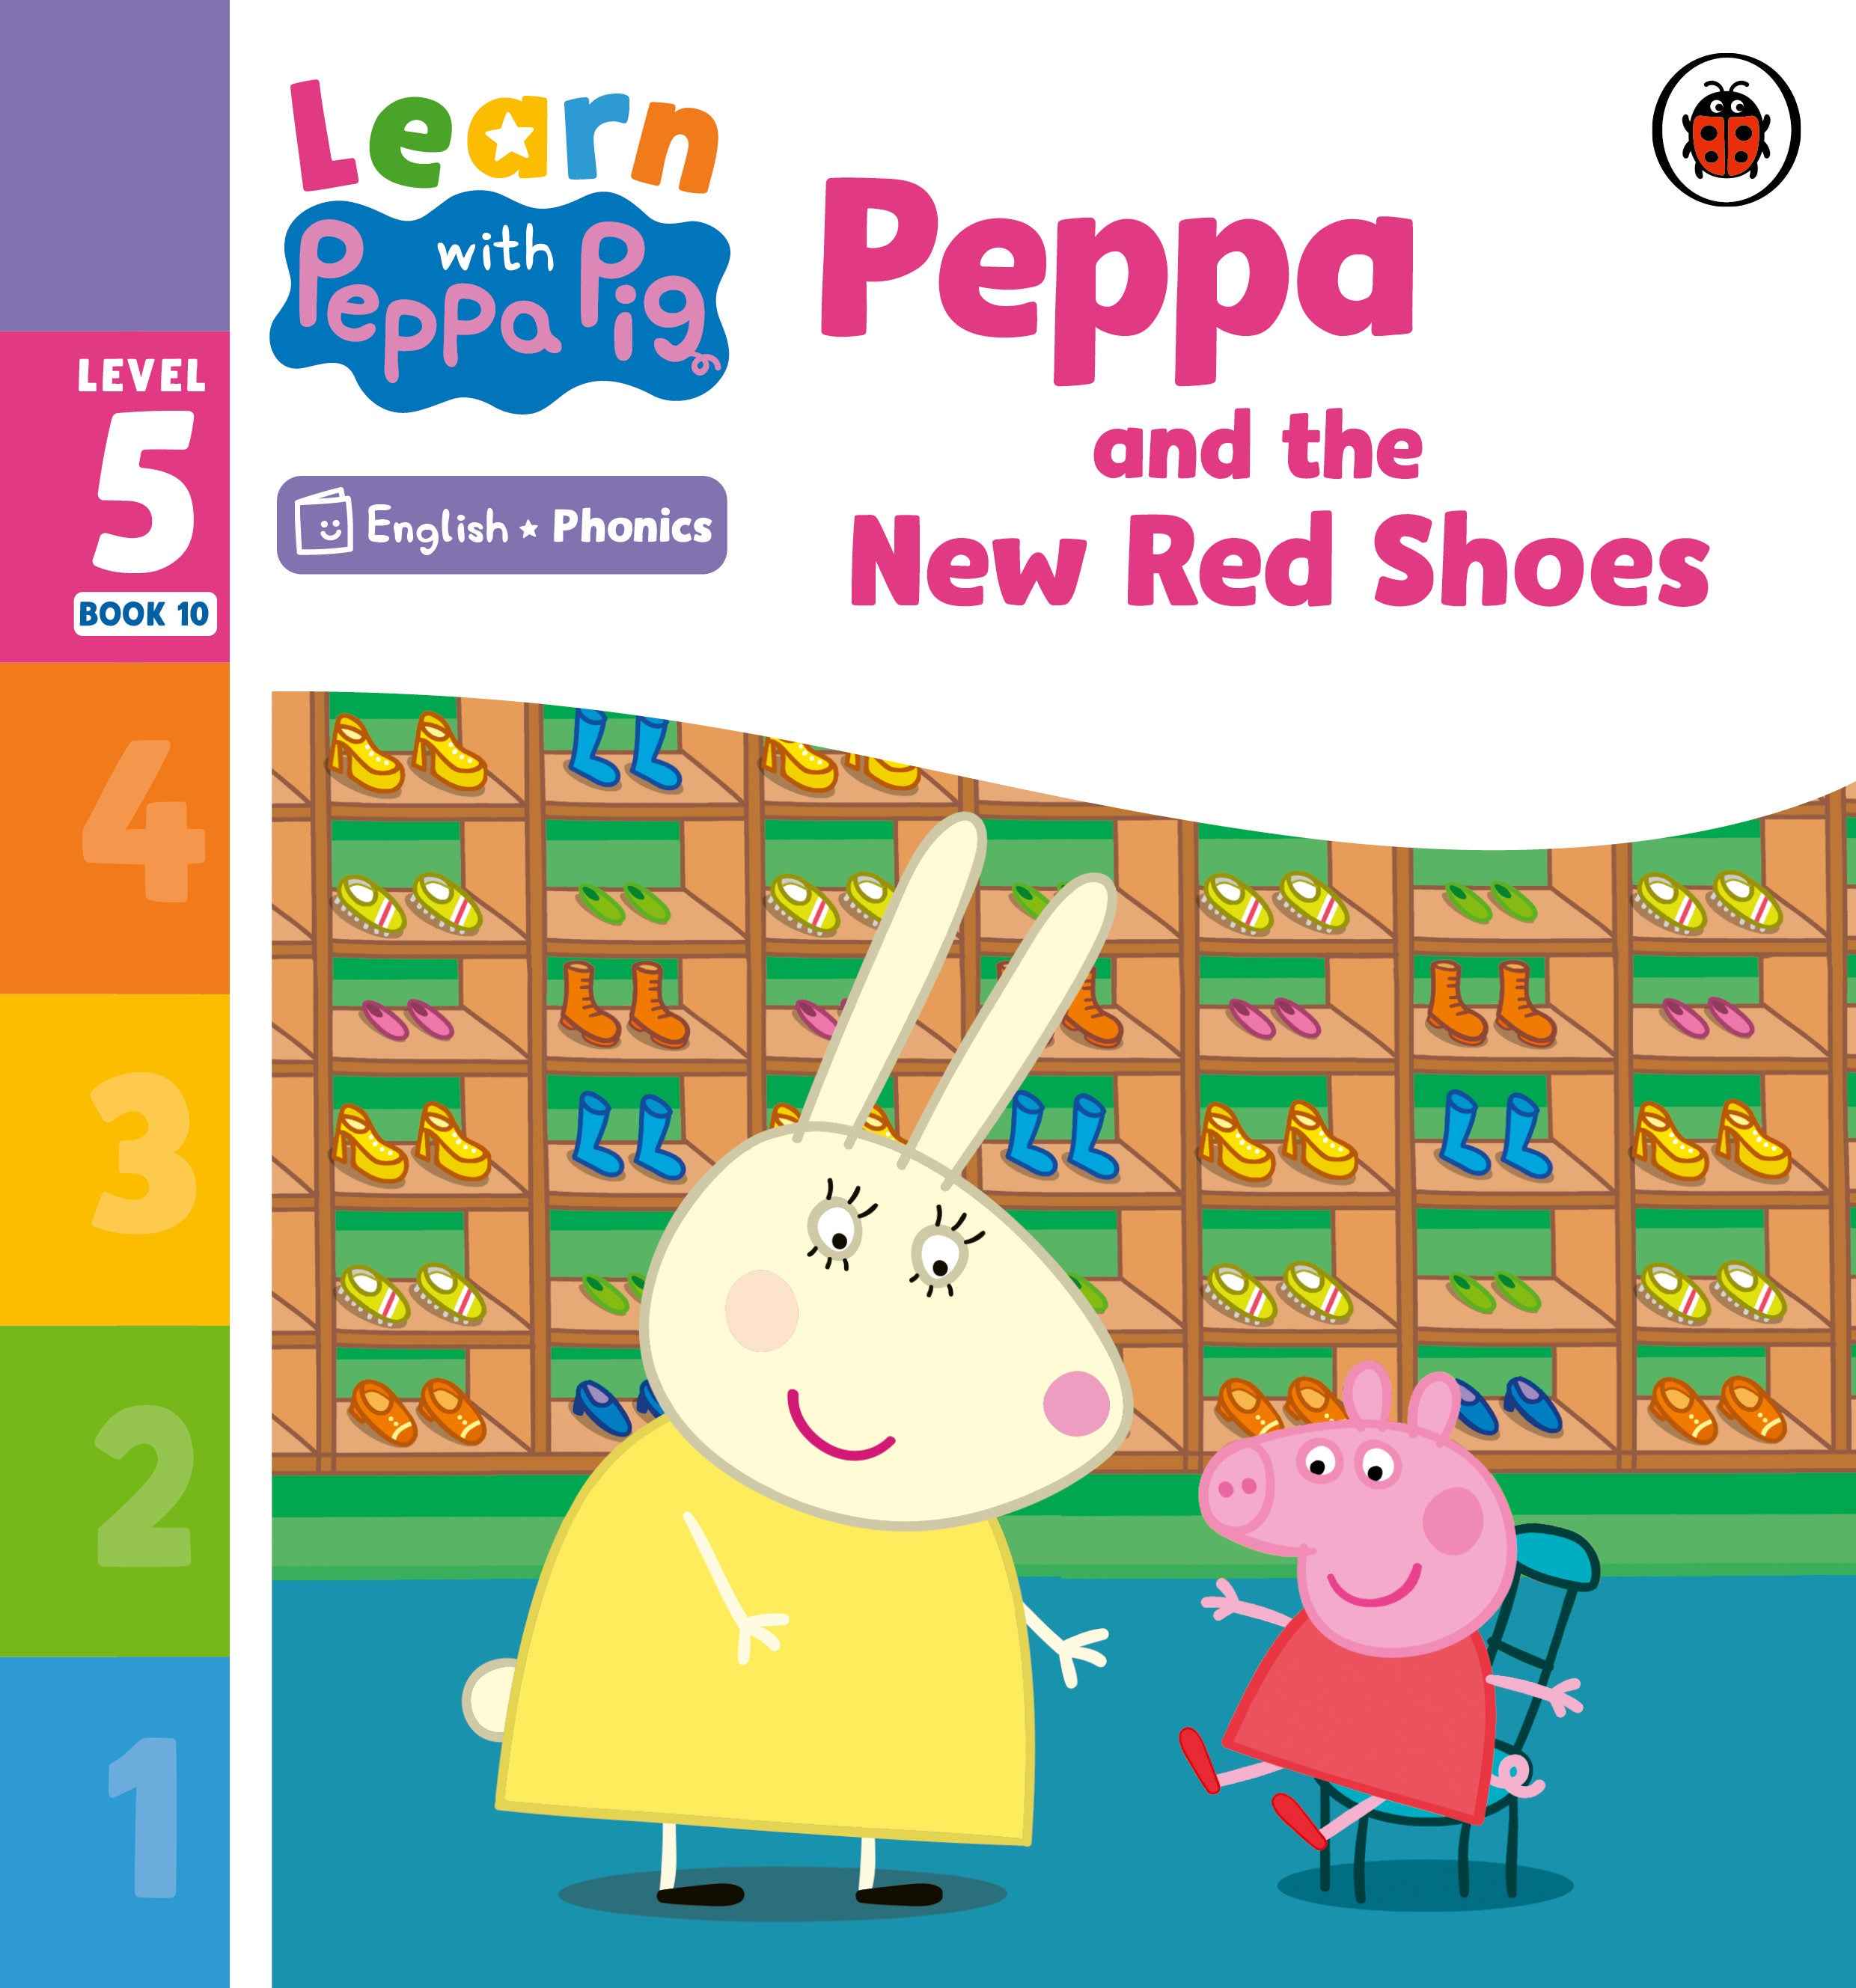 Peppa and the New Red Shoes